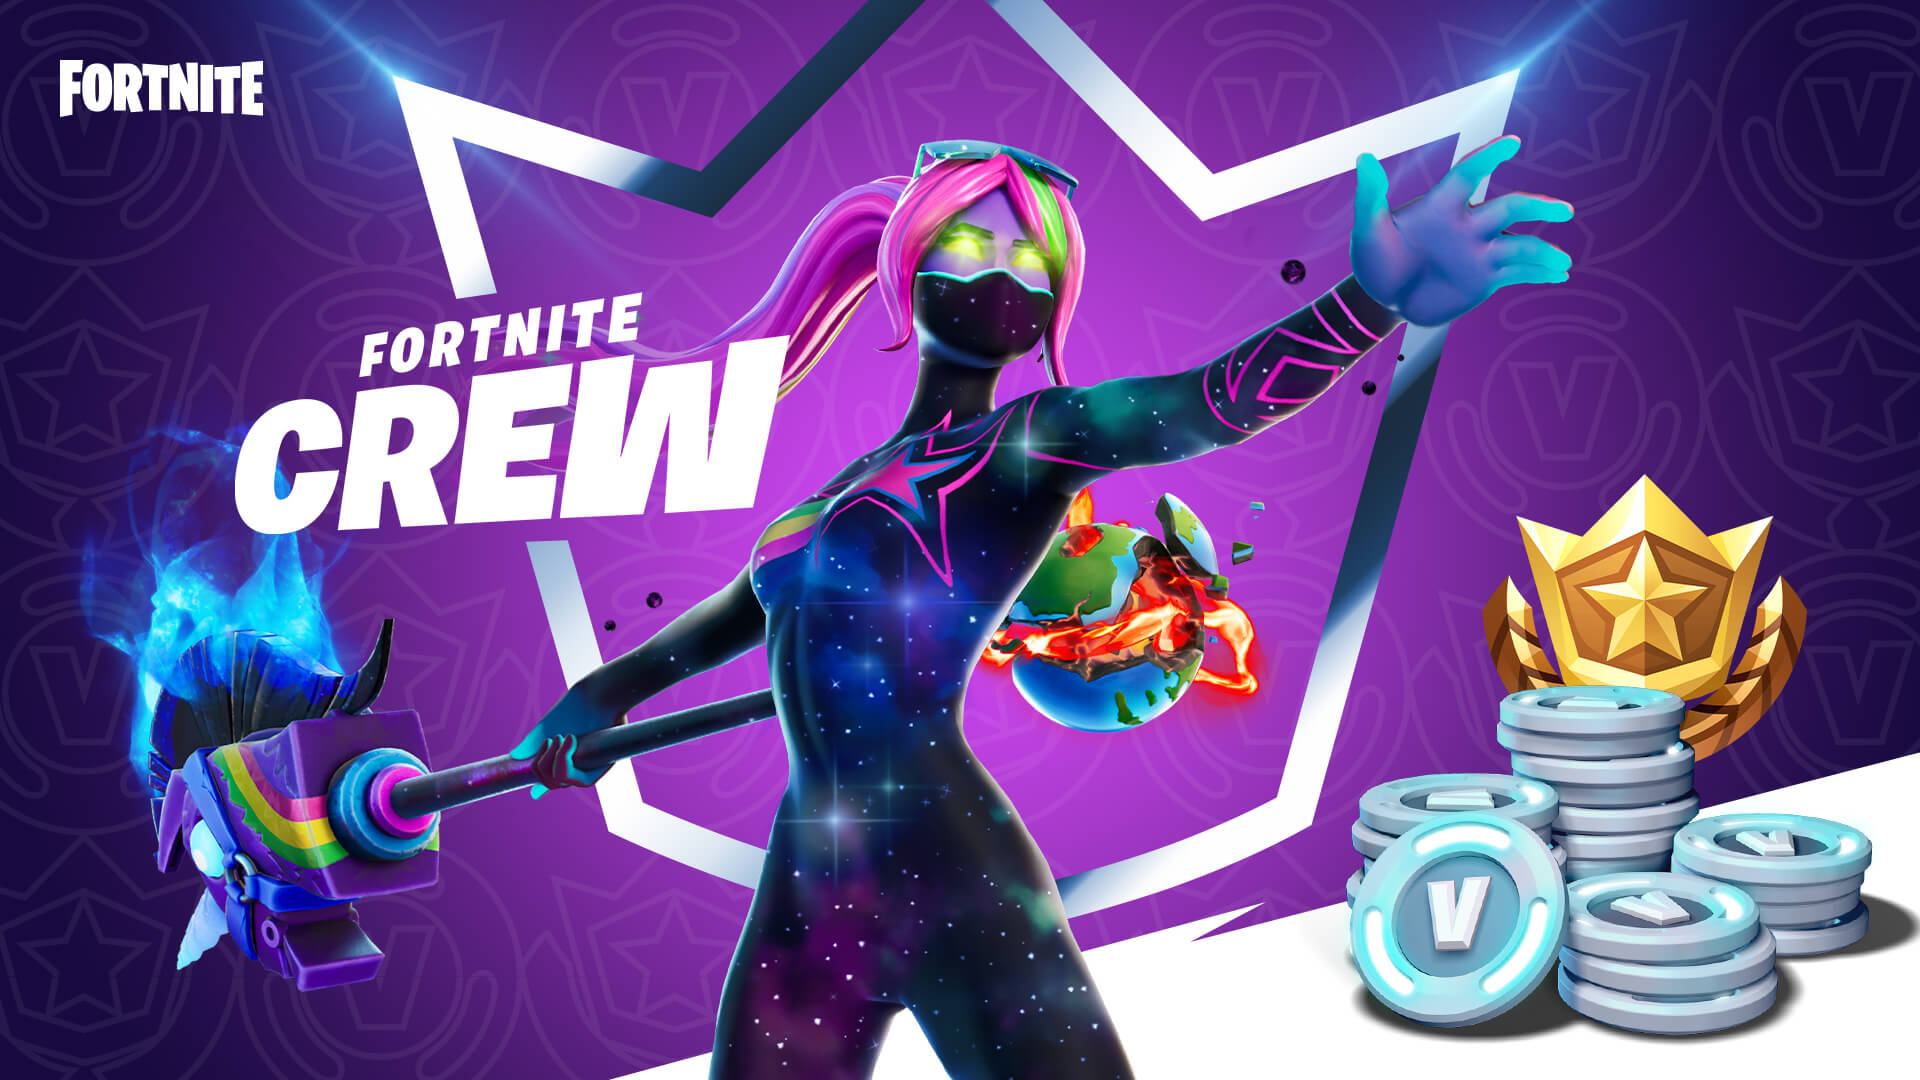 Fortnite Crew Subscription 11 99 Per Month With Battle Pass An Outfit Bundle And 1000 V Bucks Engadget 日本版